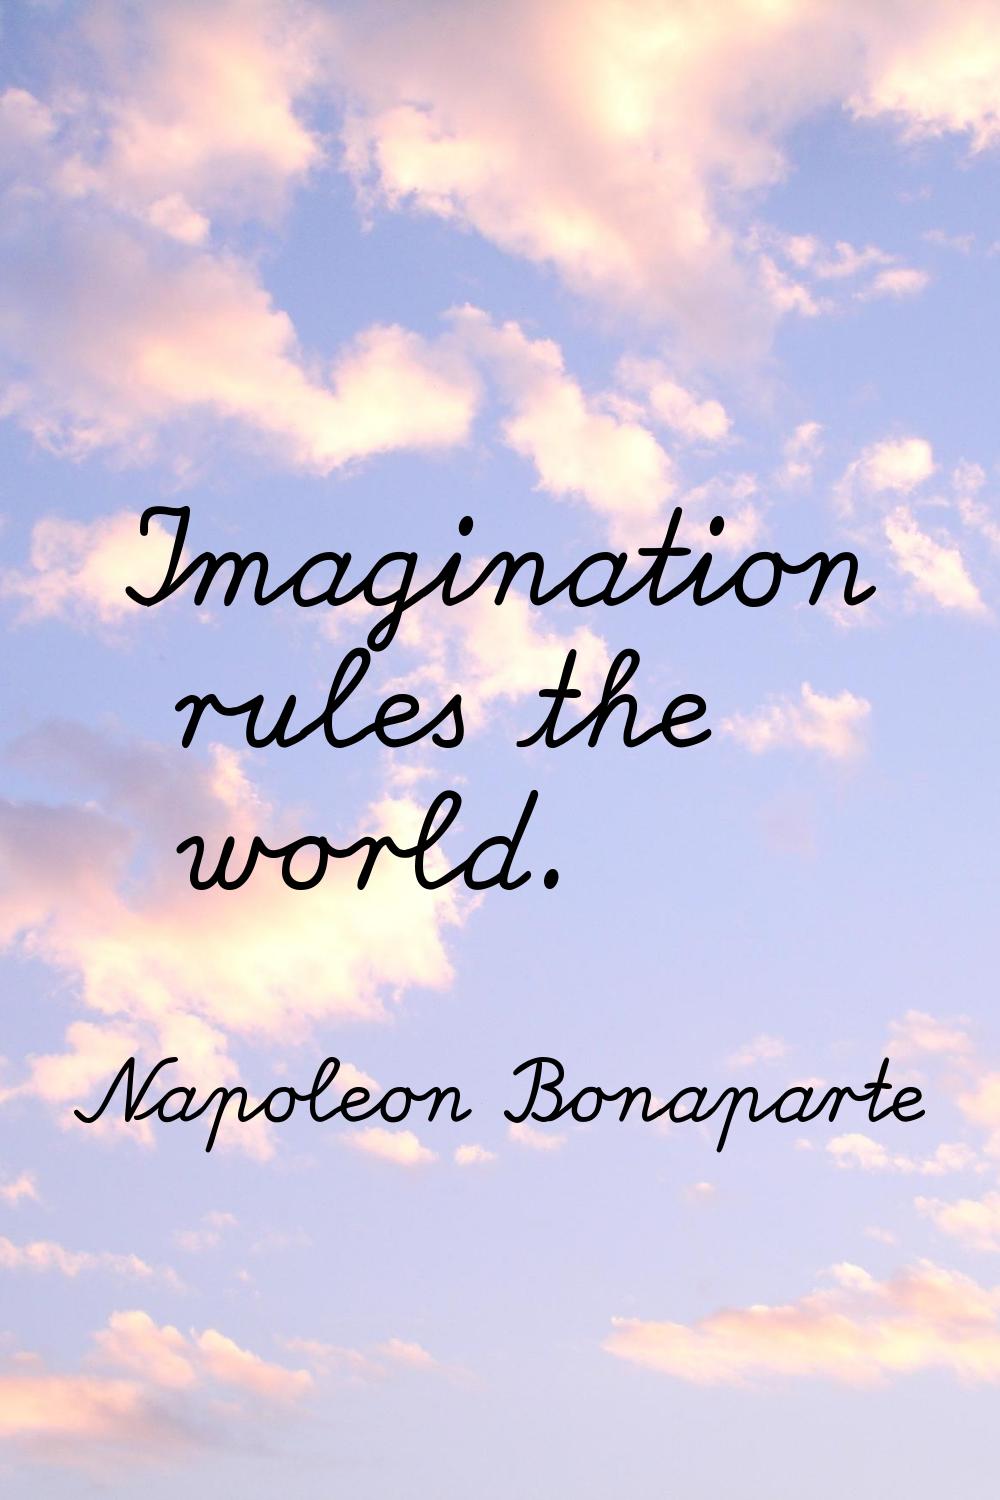 Imagination rules the world.